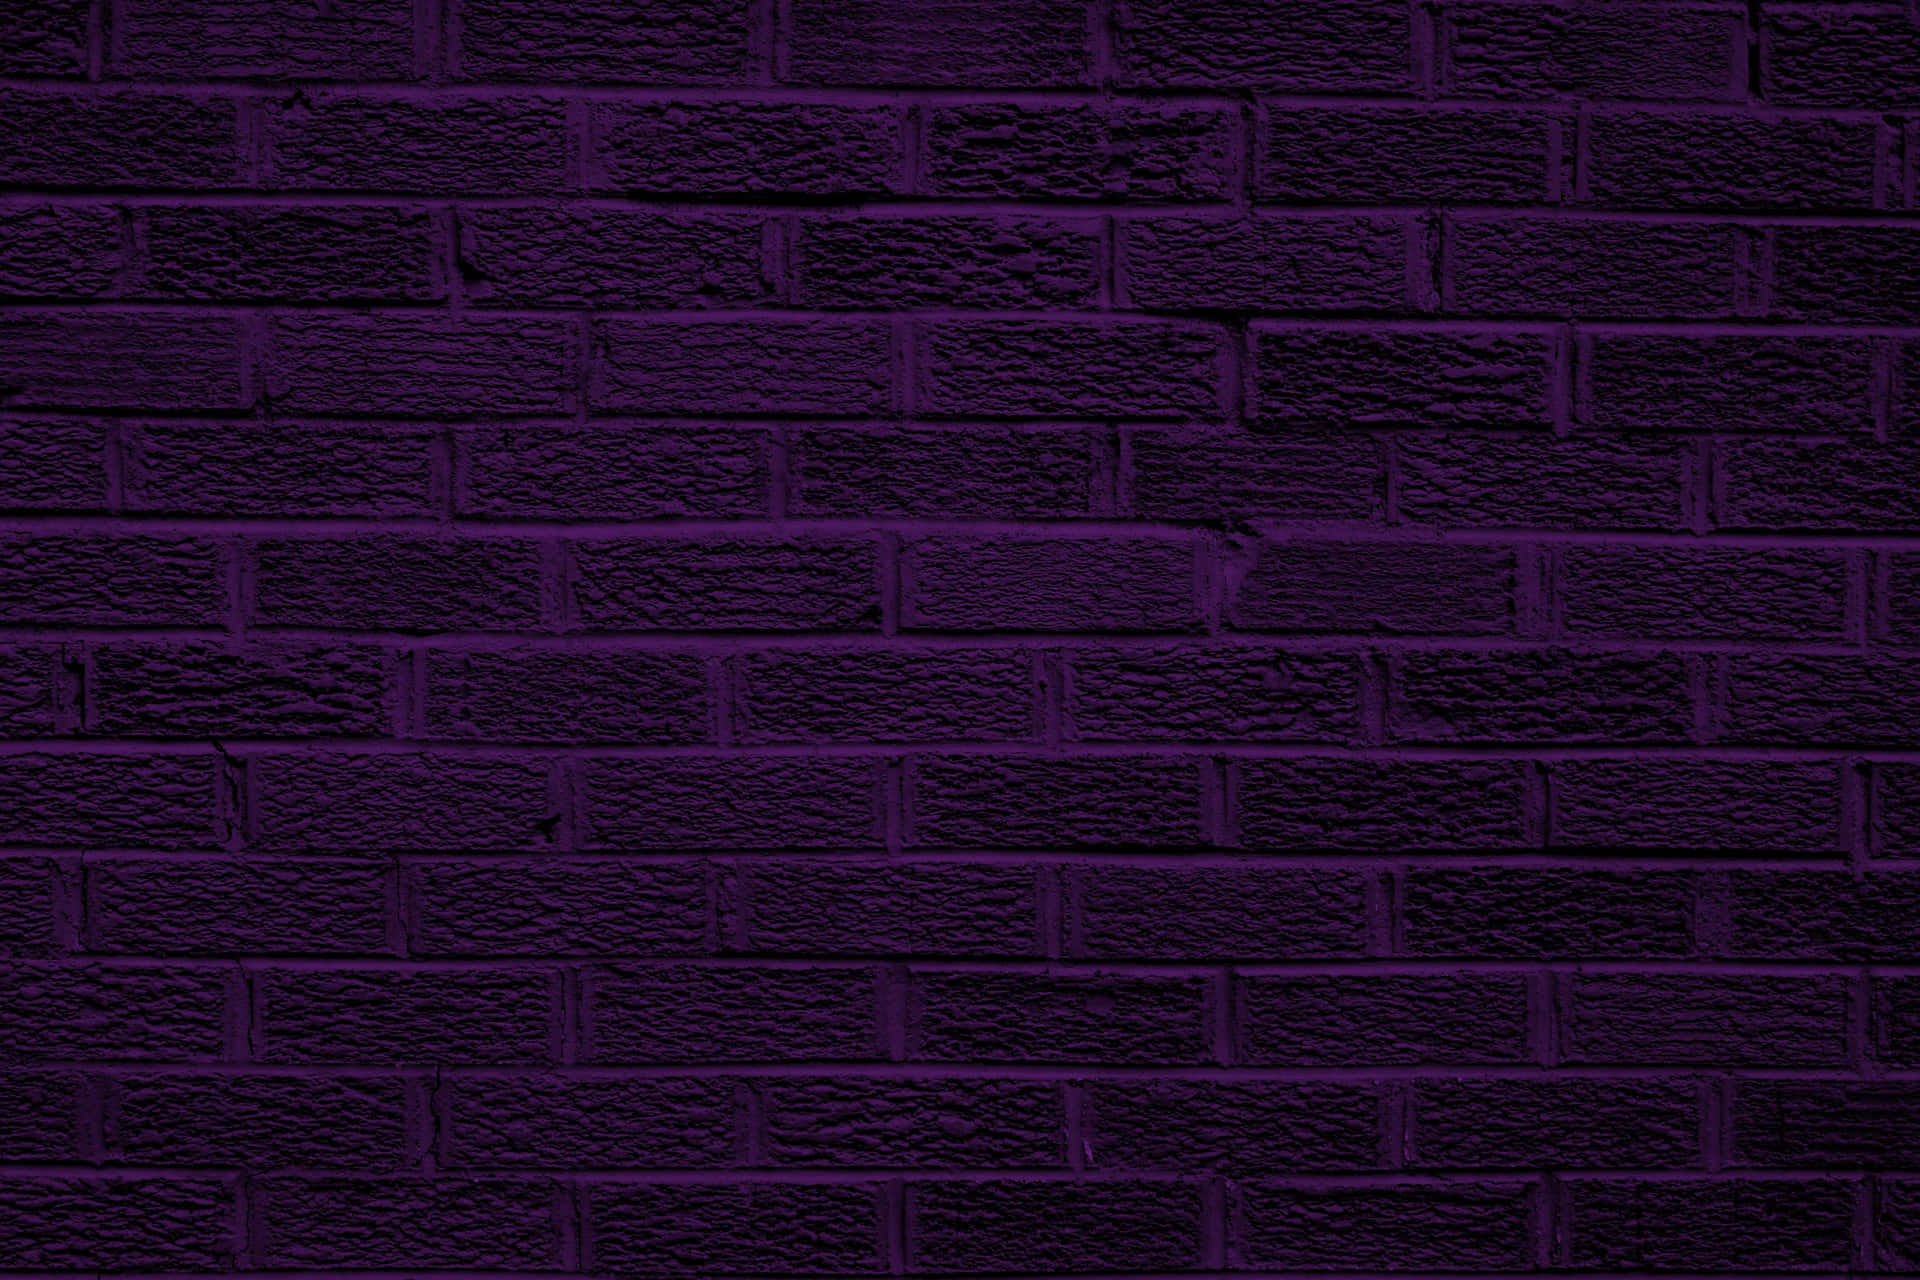 A captivating dark purple background providing a mysterious yet serene atmosphere.